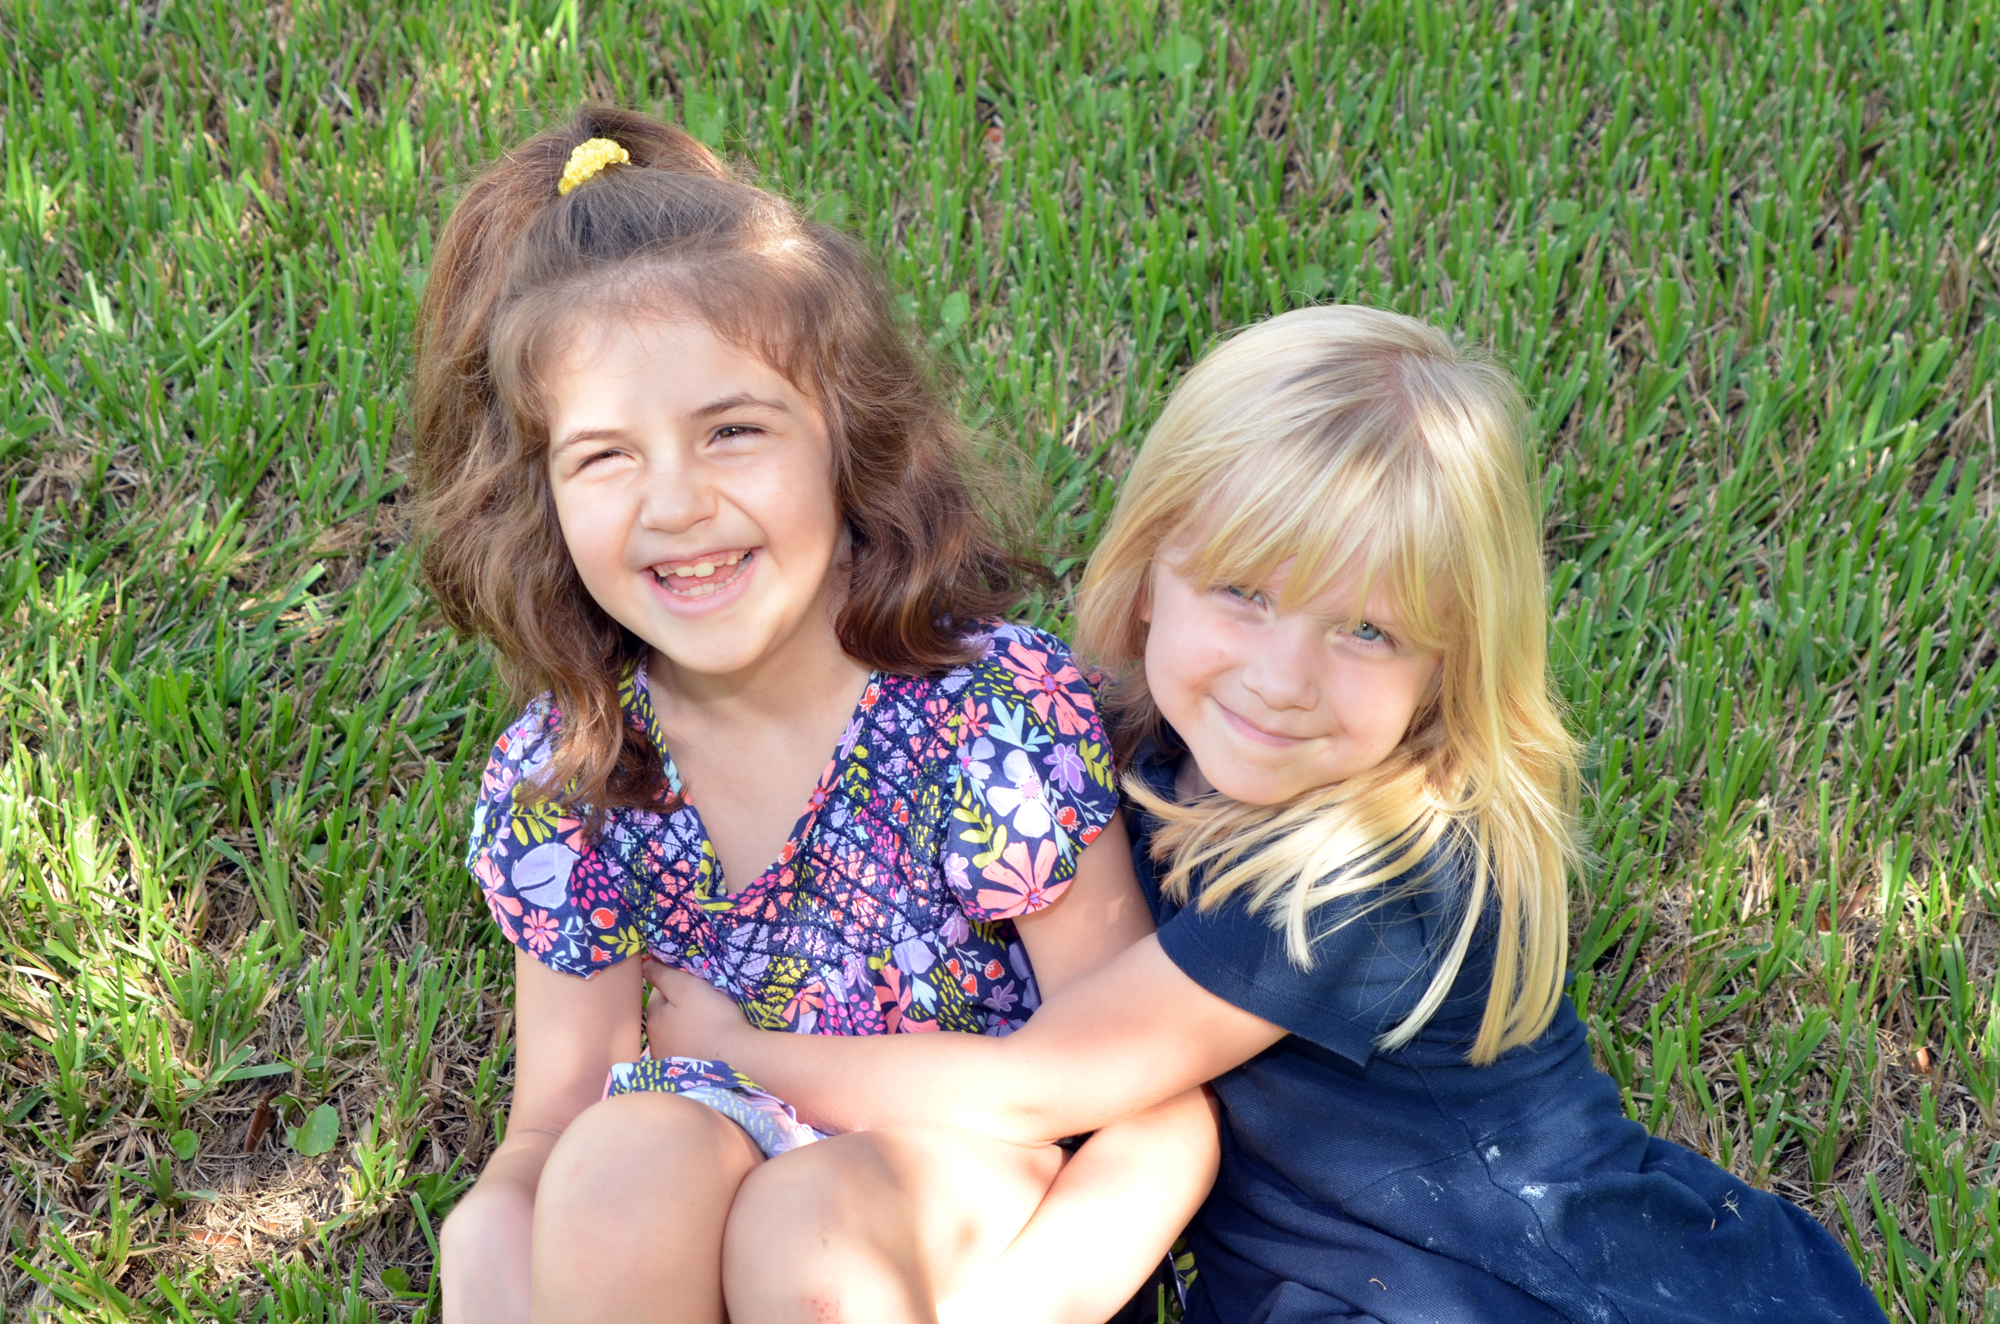 Aubrey Mullen, right, is protective of her older sister, Melia.